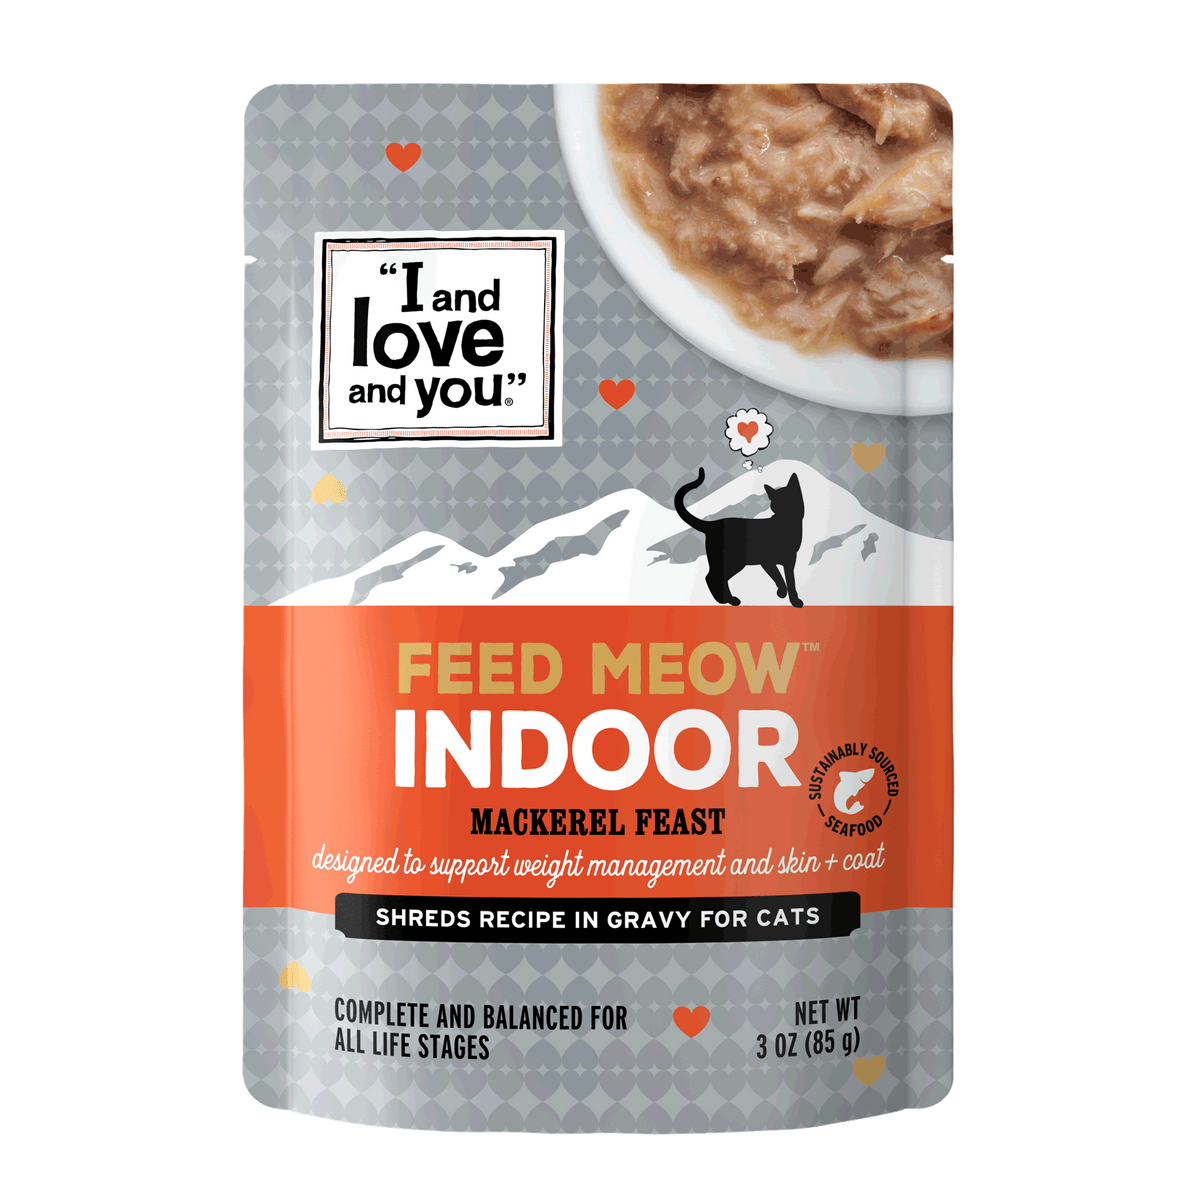 A package of cat food featuring the Feed Meow Indoor product label and a close-up of food on a plate.